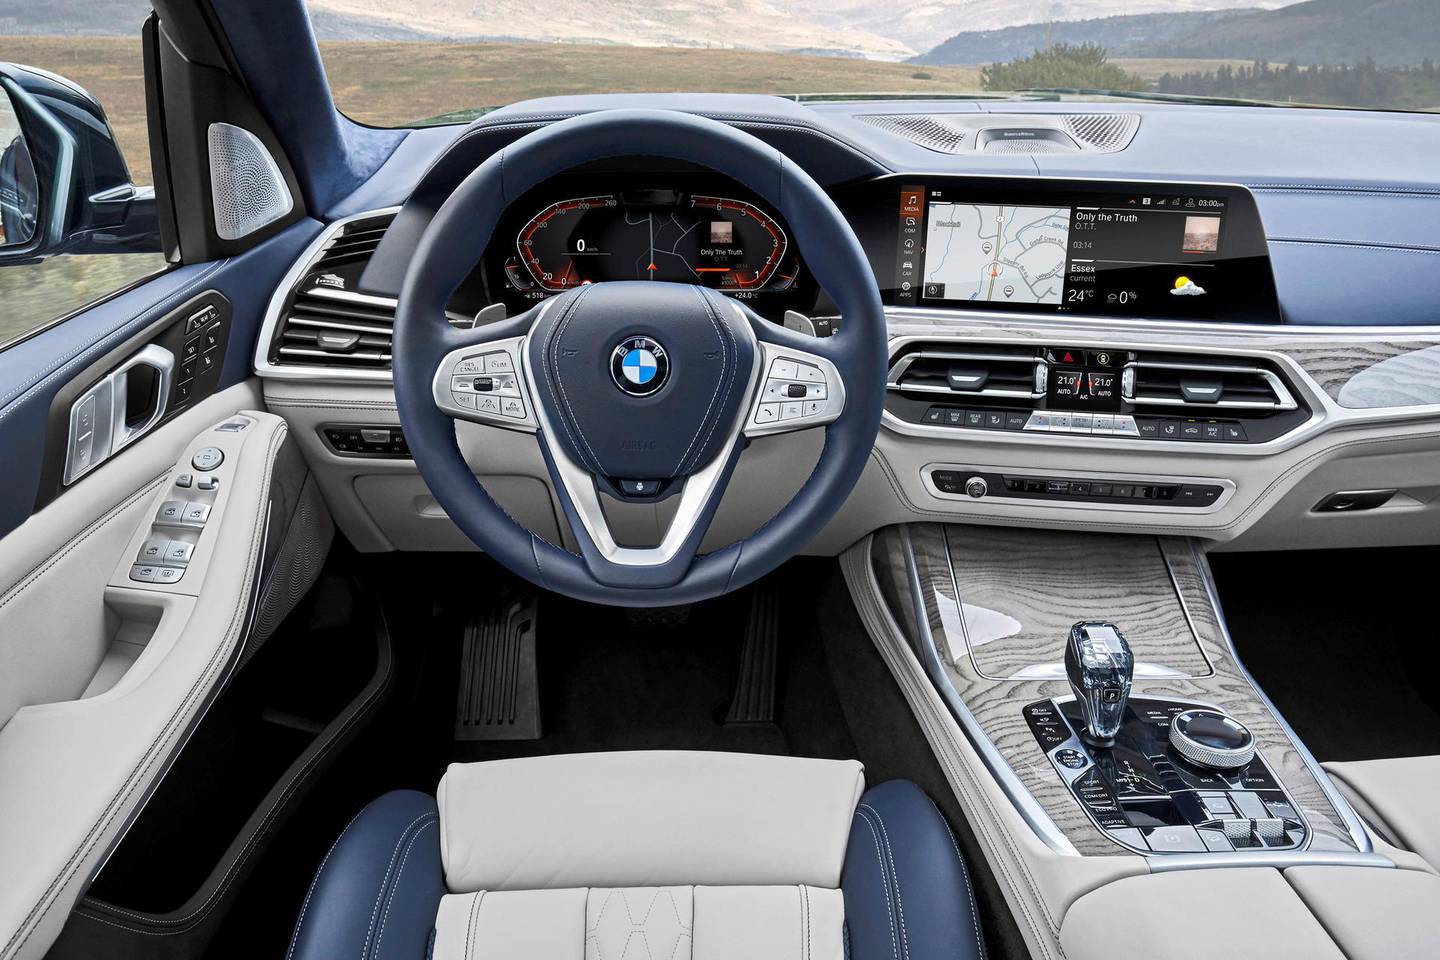 It's all very serene inside. Courtesy BMW